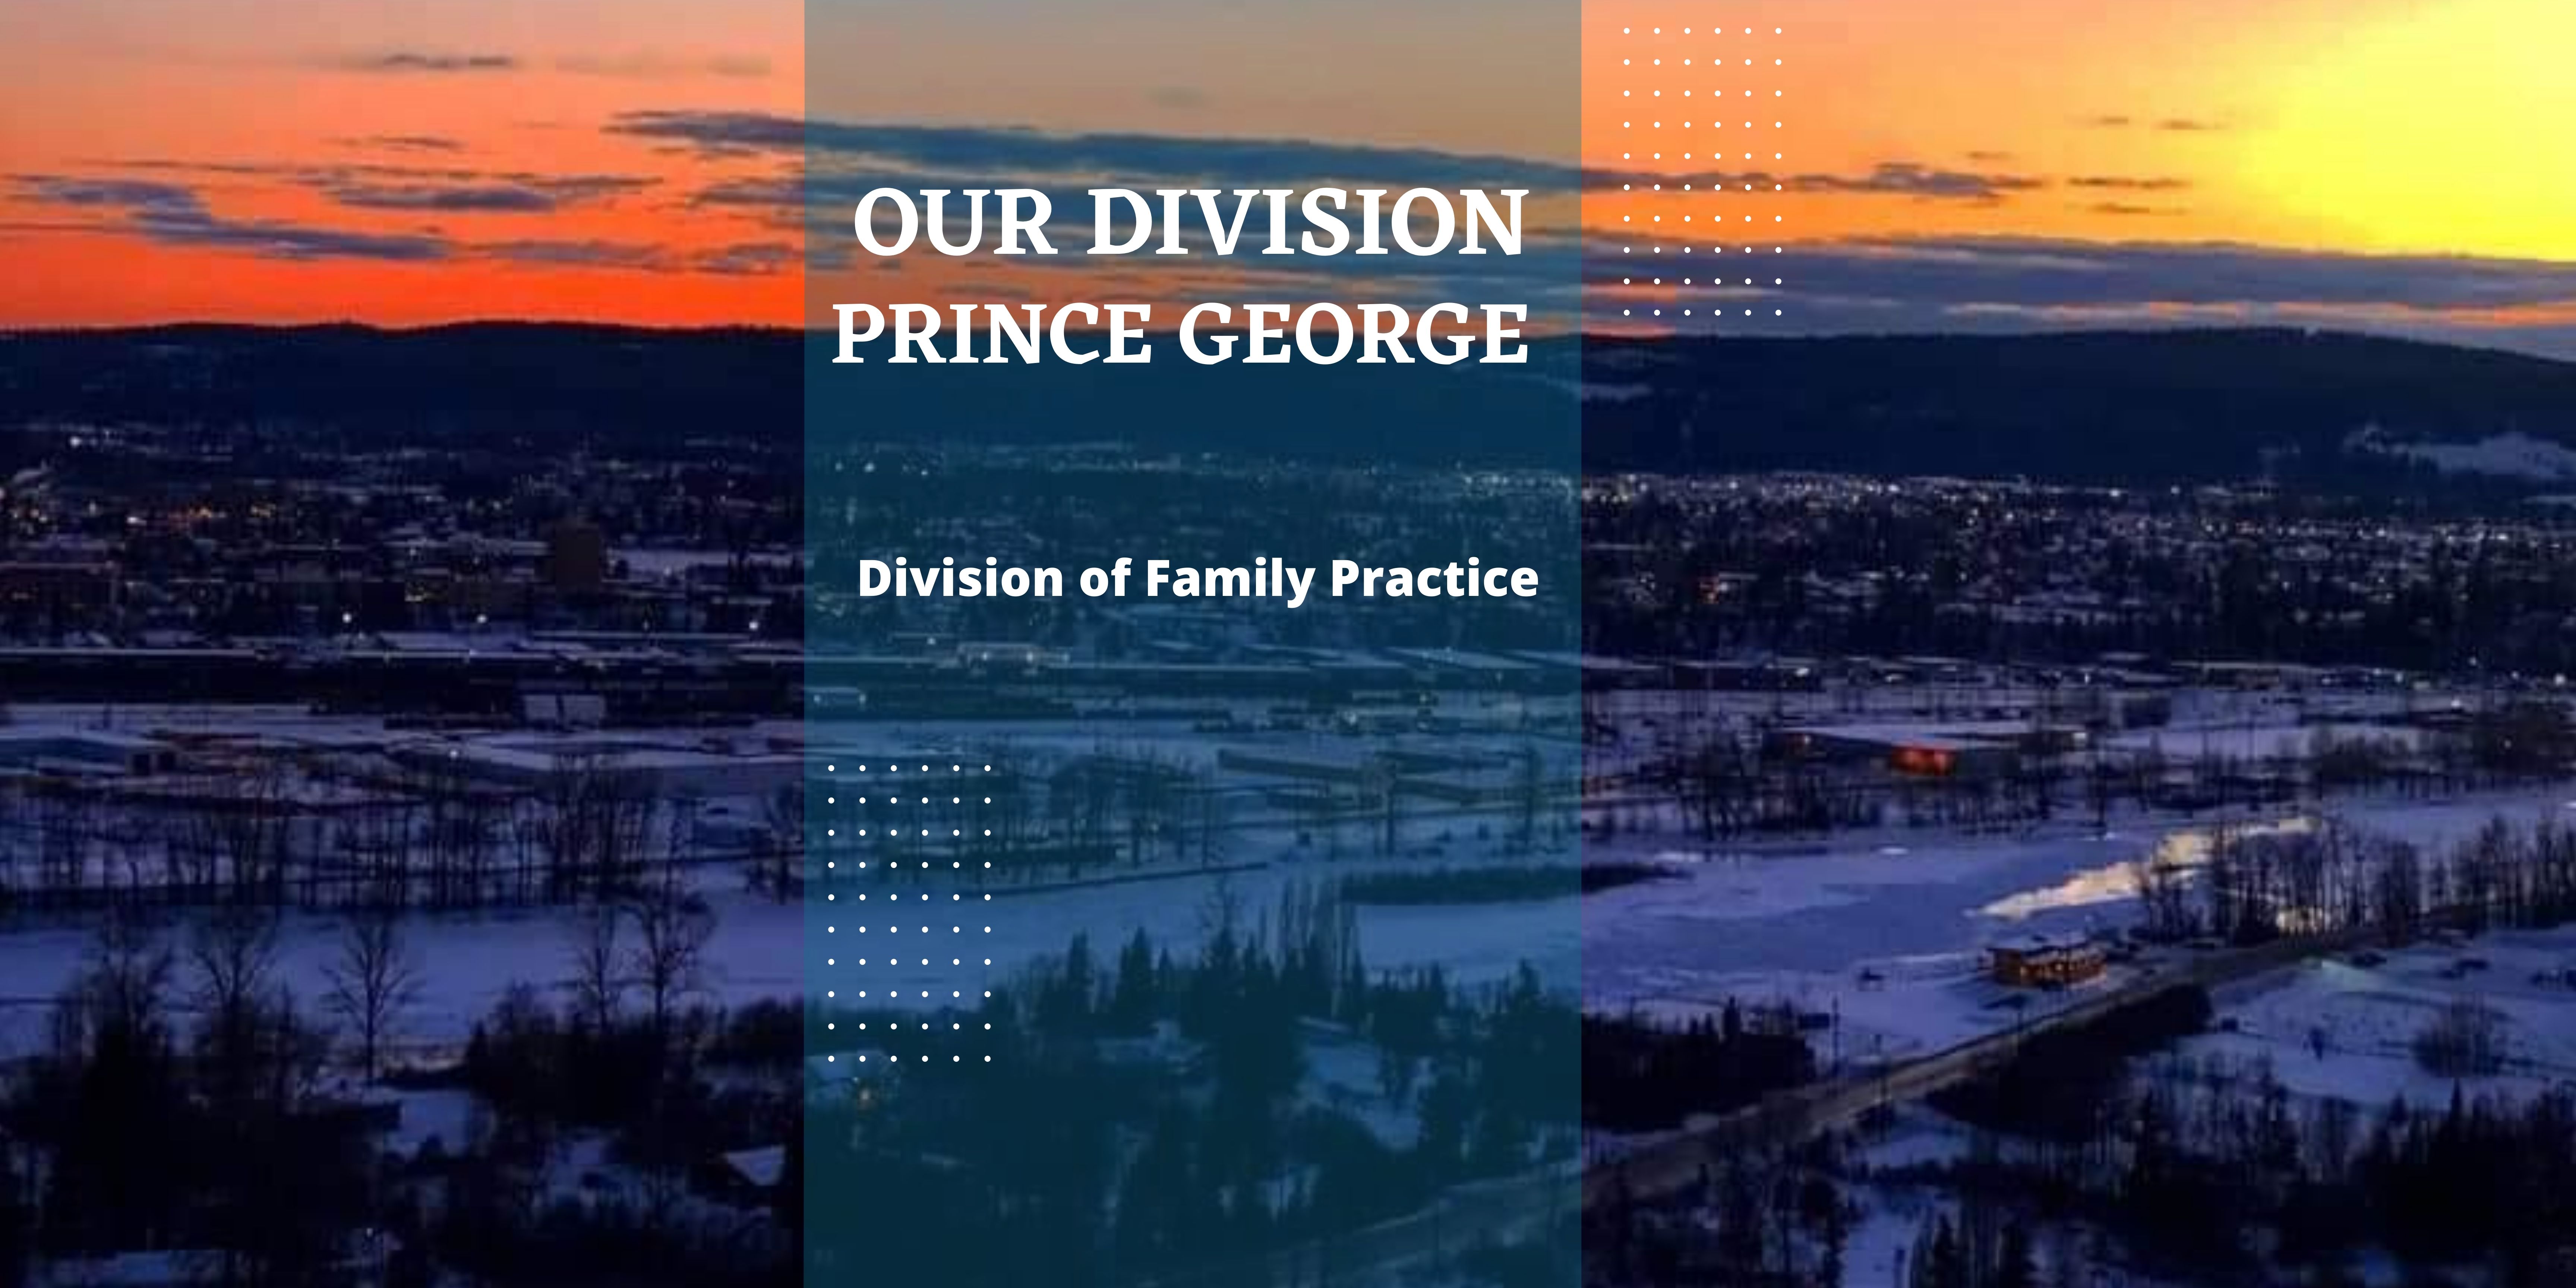 Prince George division of family practice